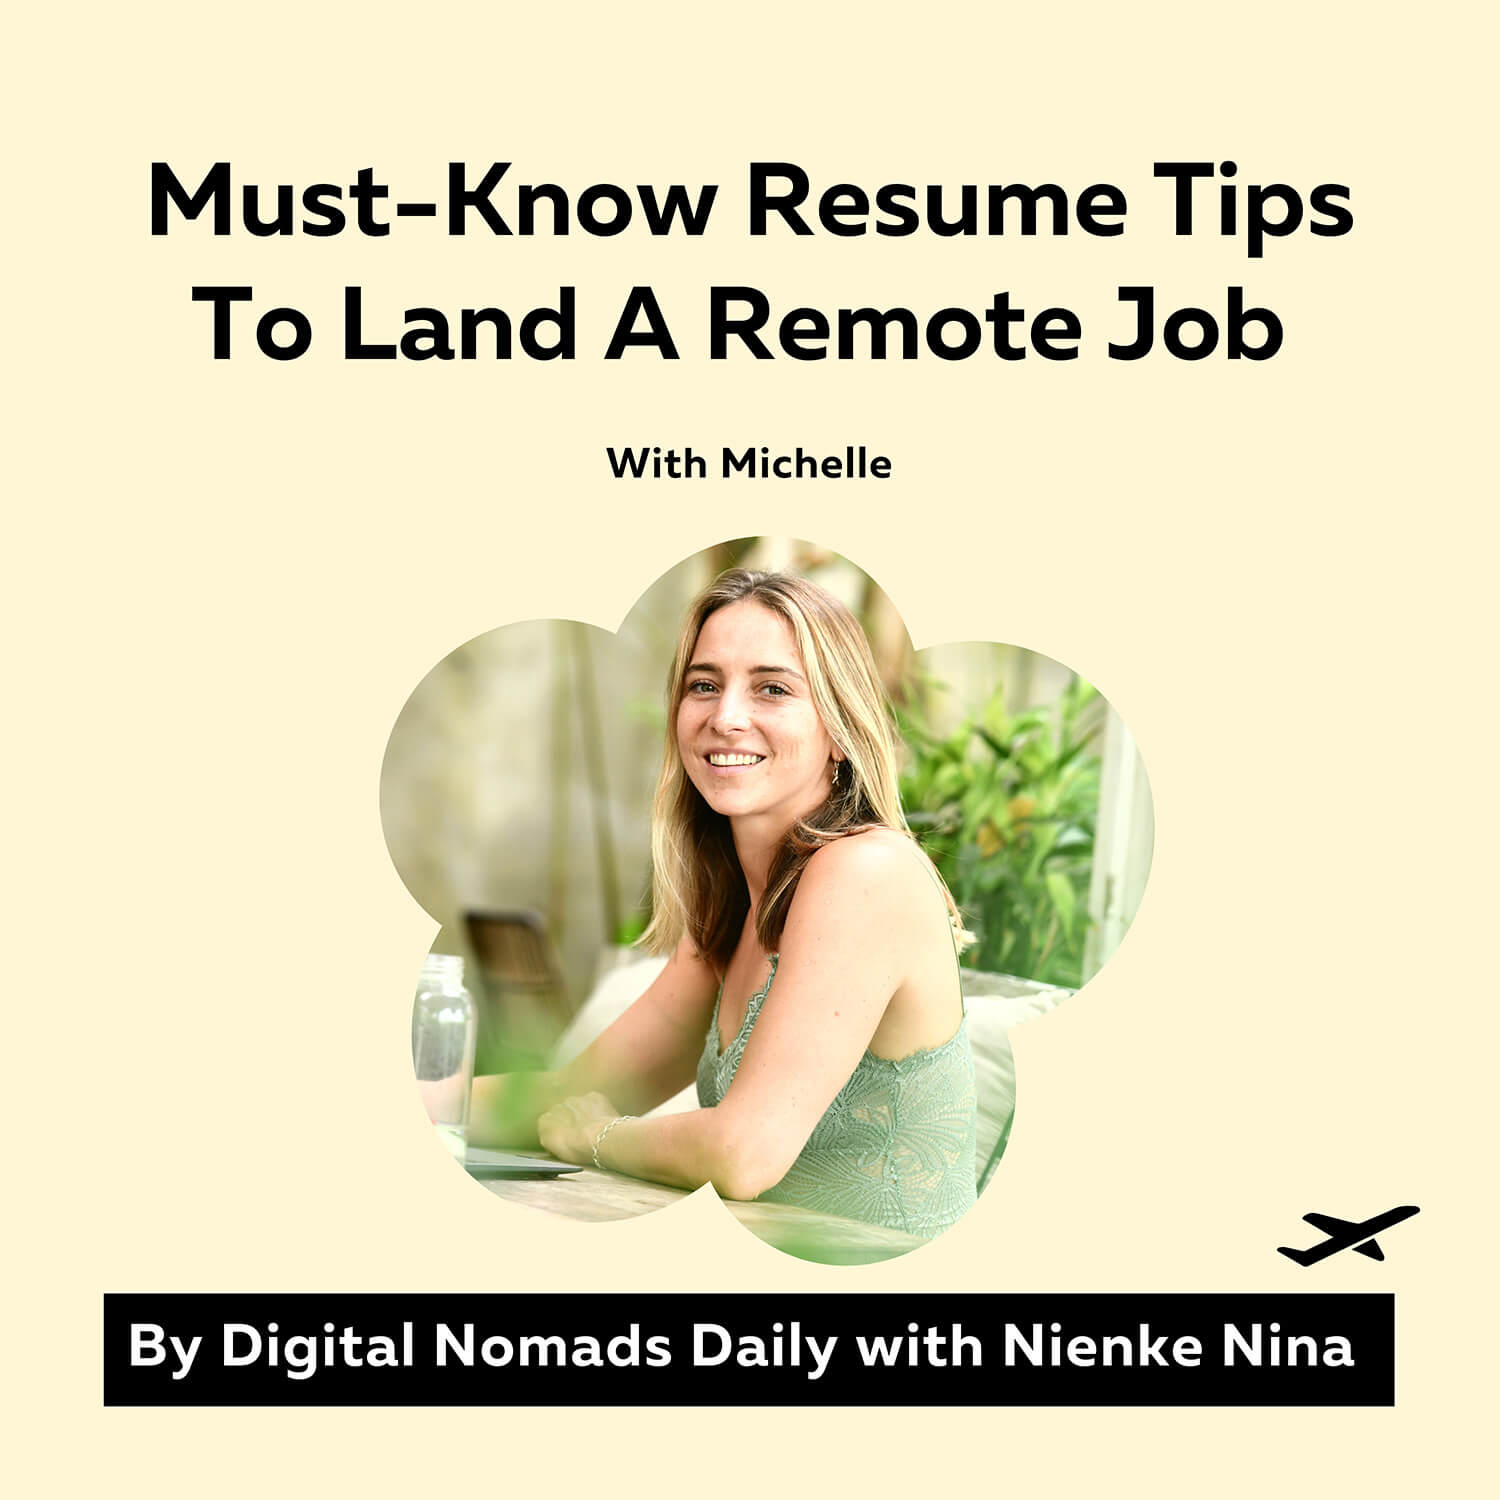 Cover photo Digital Nomads Daily Podcast episode Must-Know Resume Tips To Land A Remote Job with Michelle (1)